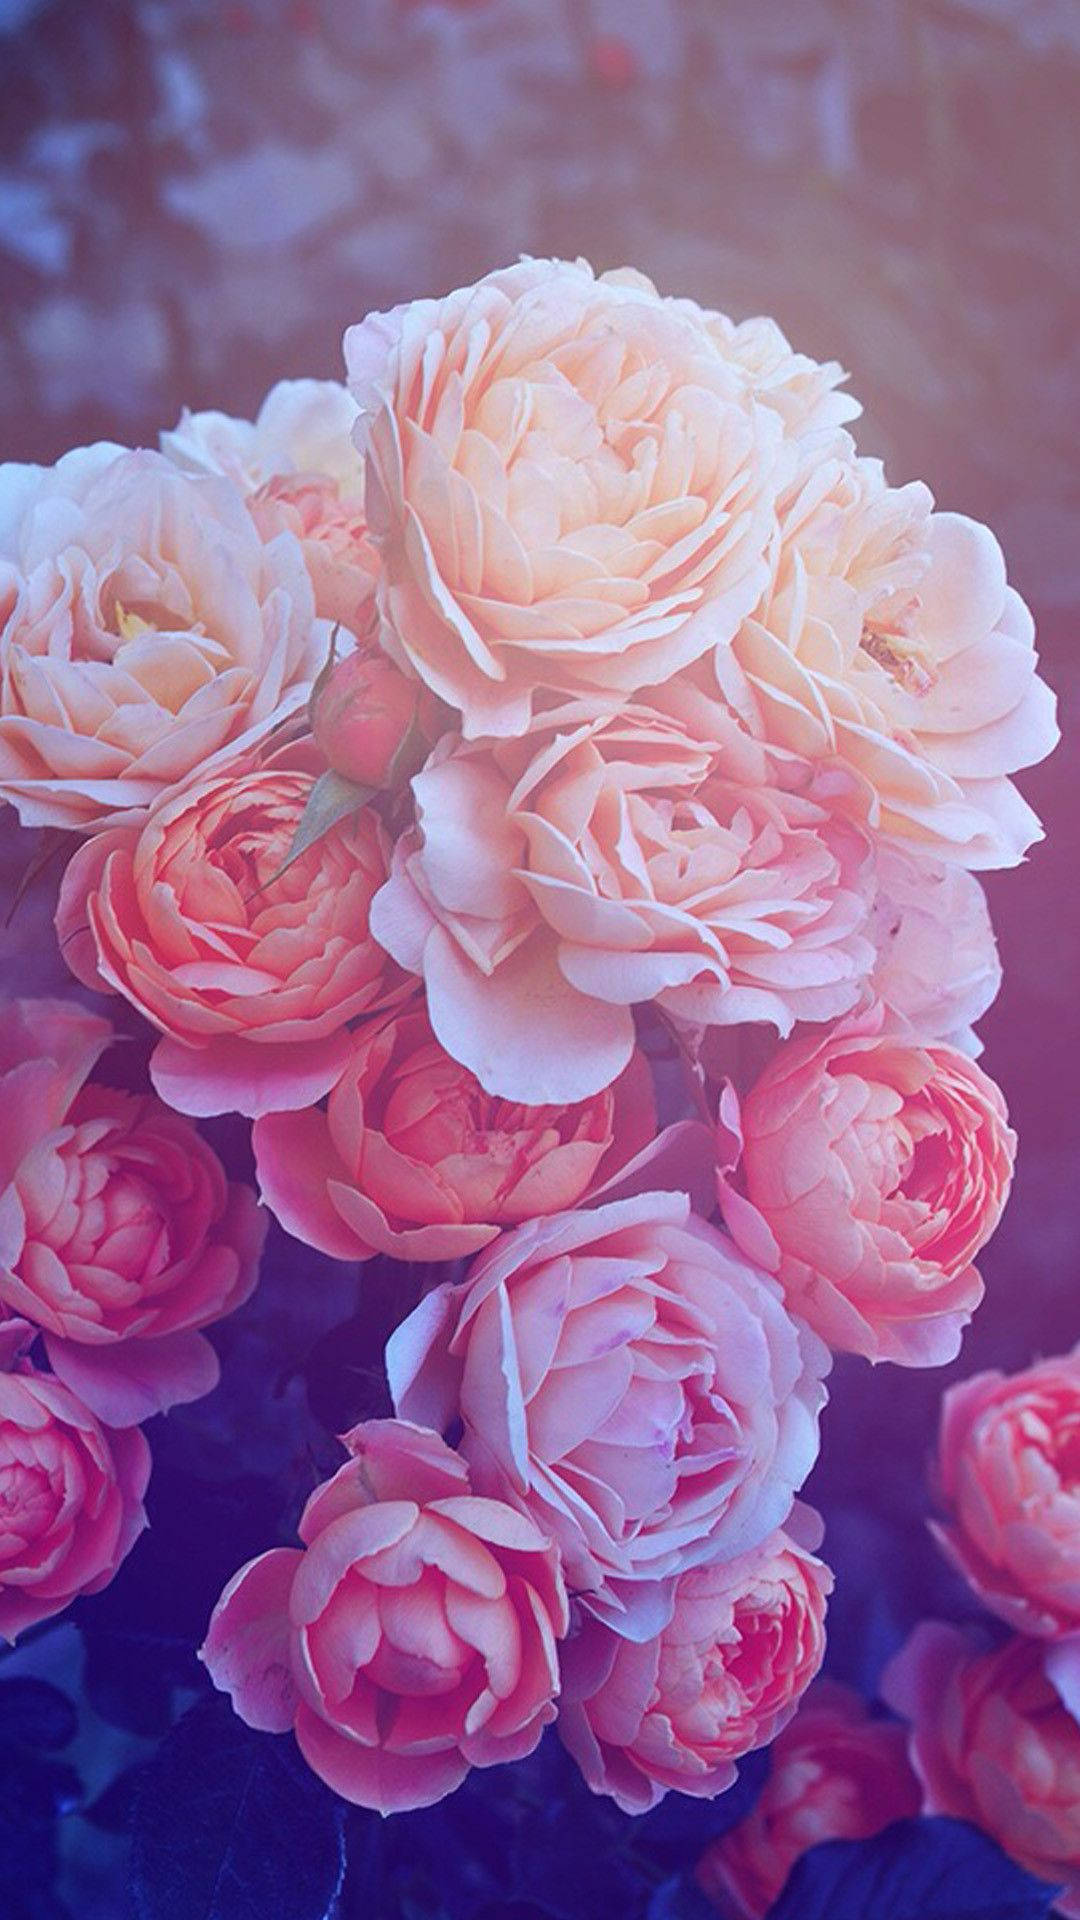 White, Peach And Pink Rose Iphone Background